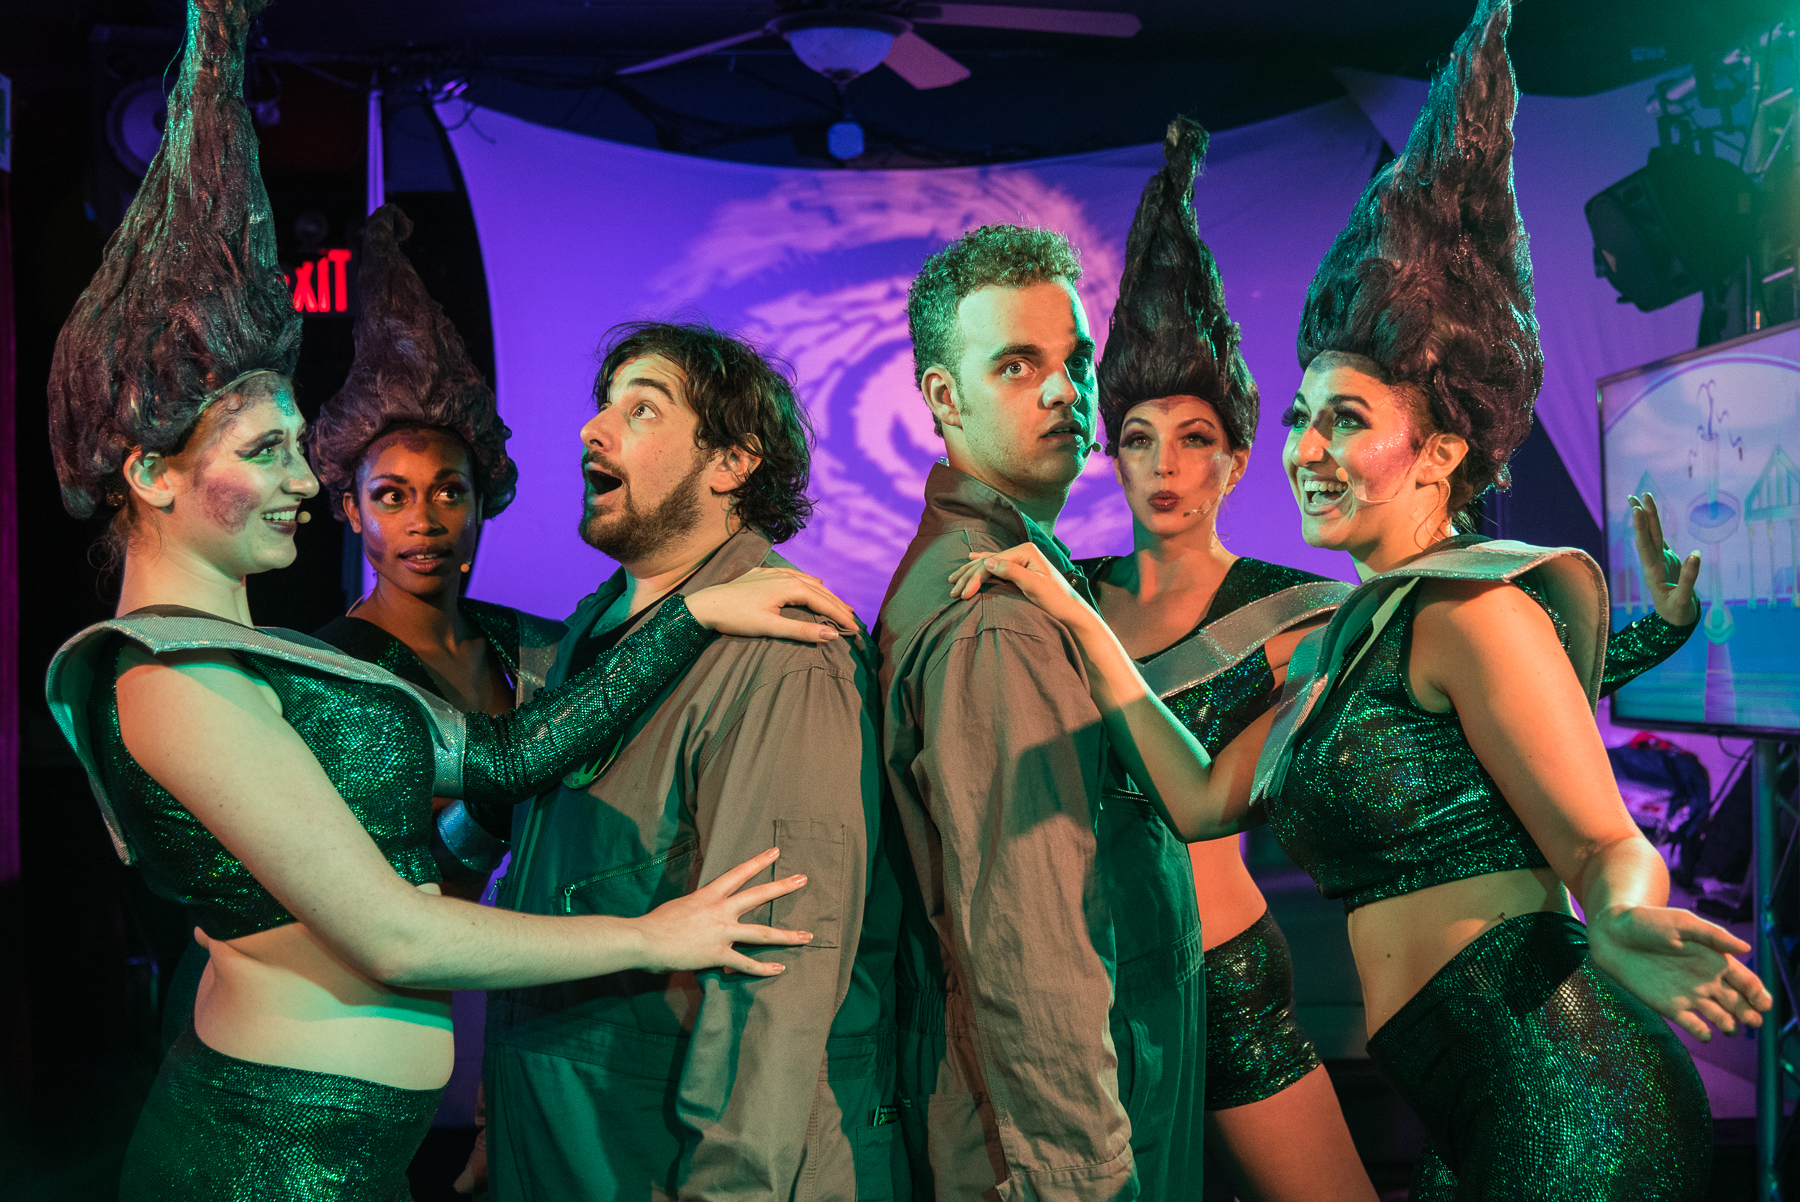 The Pittsburgh Fringe Festival's offerings include many out-there performances including Not Too Fancy Productions' 'Wild Women of Planet Wongo.'